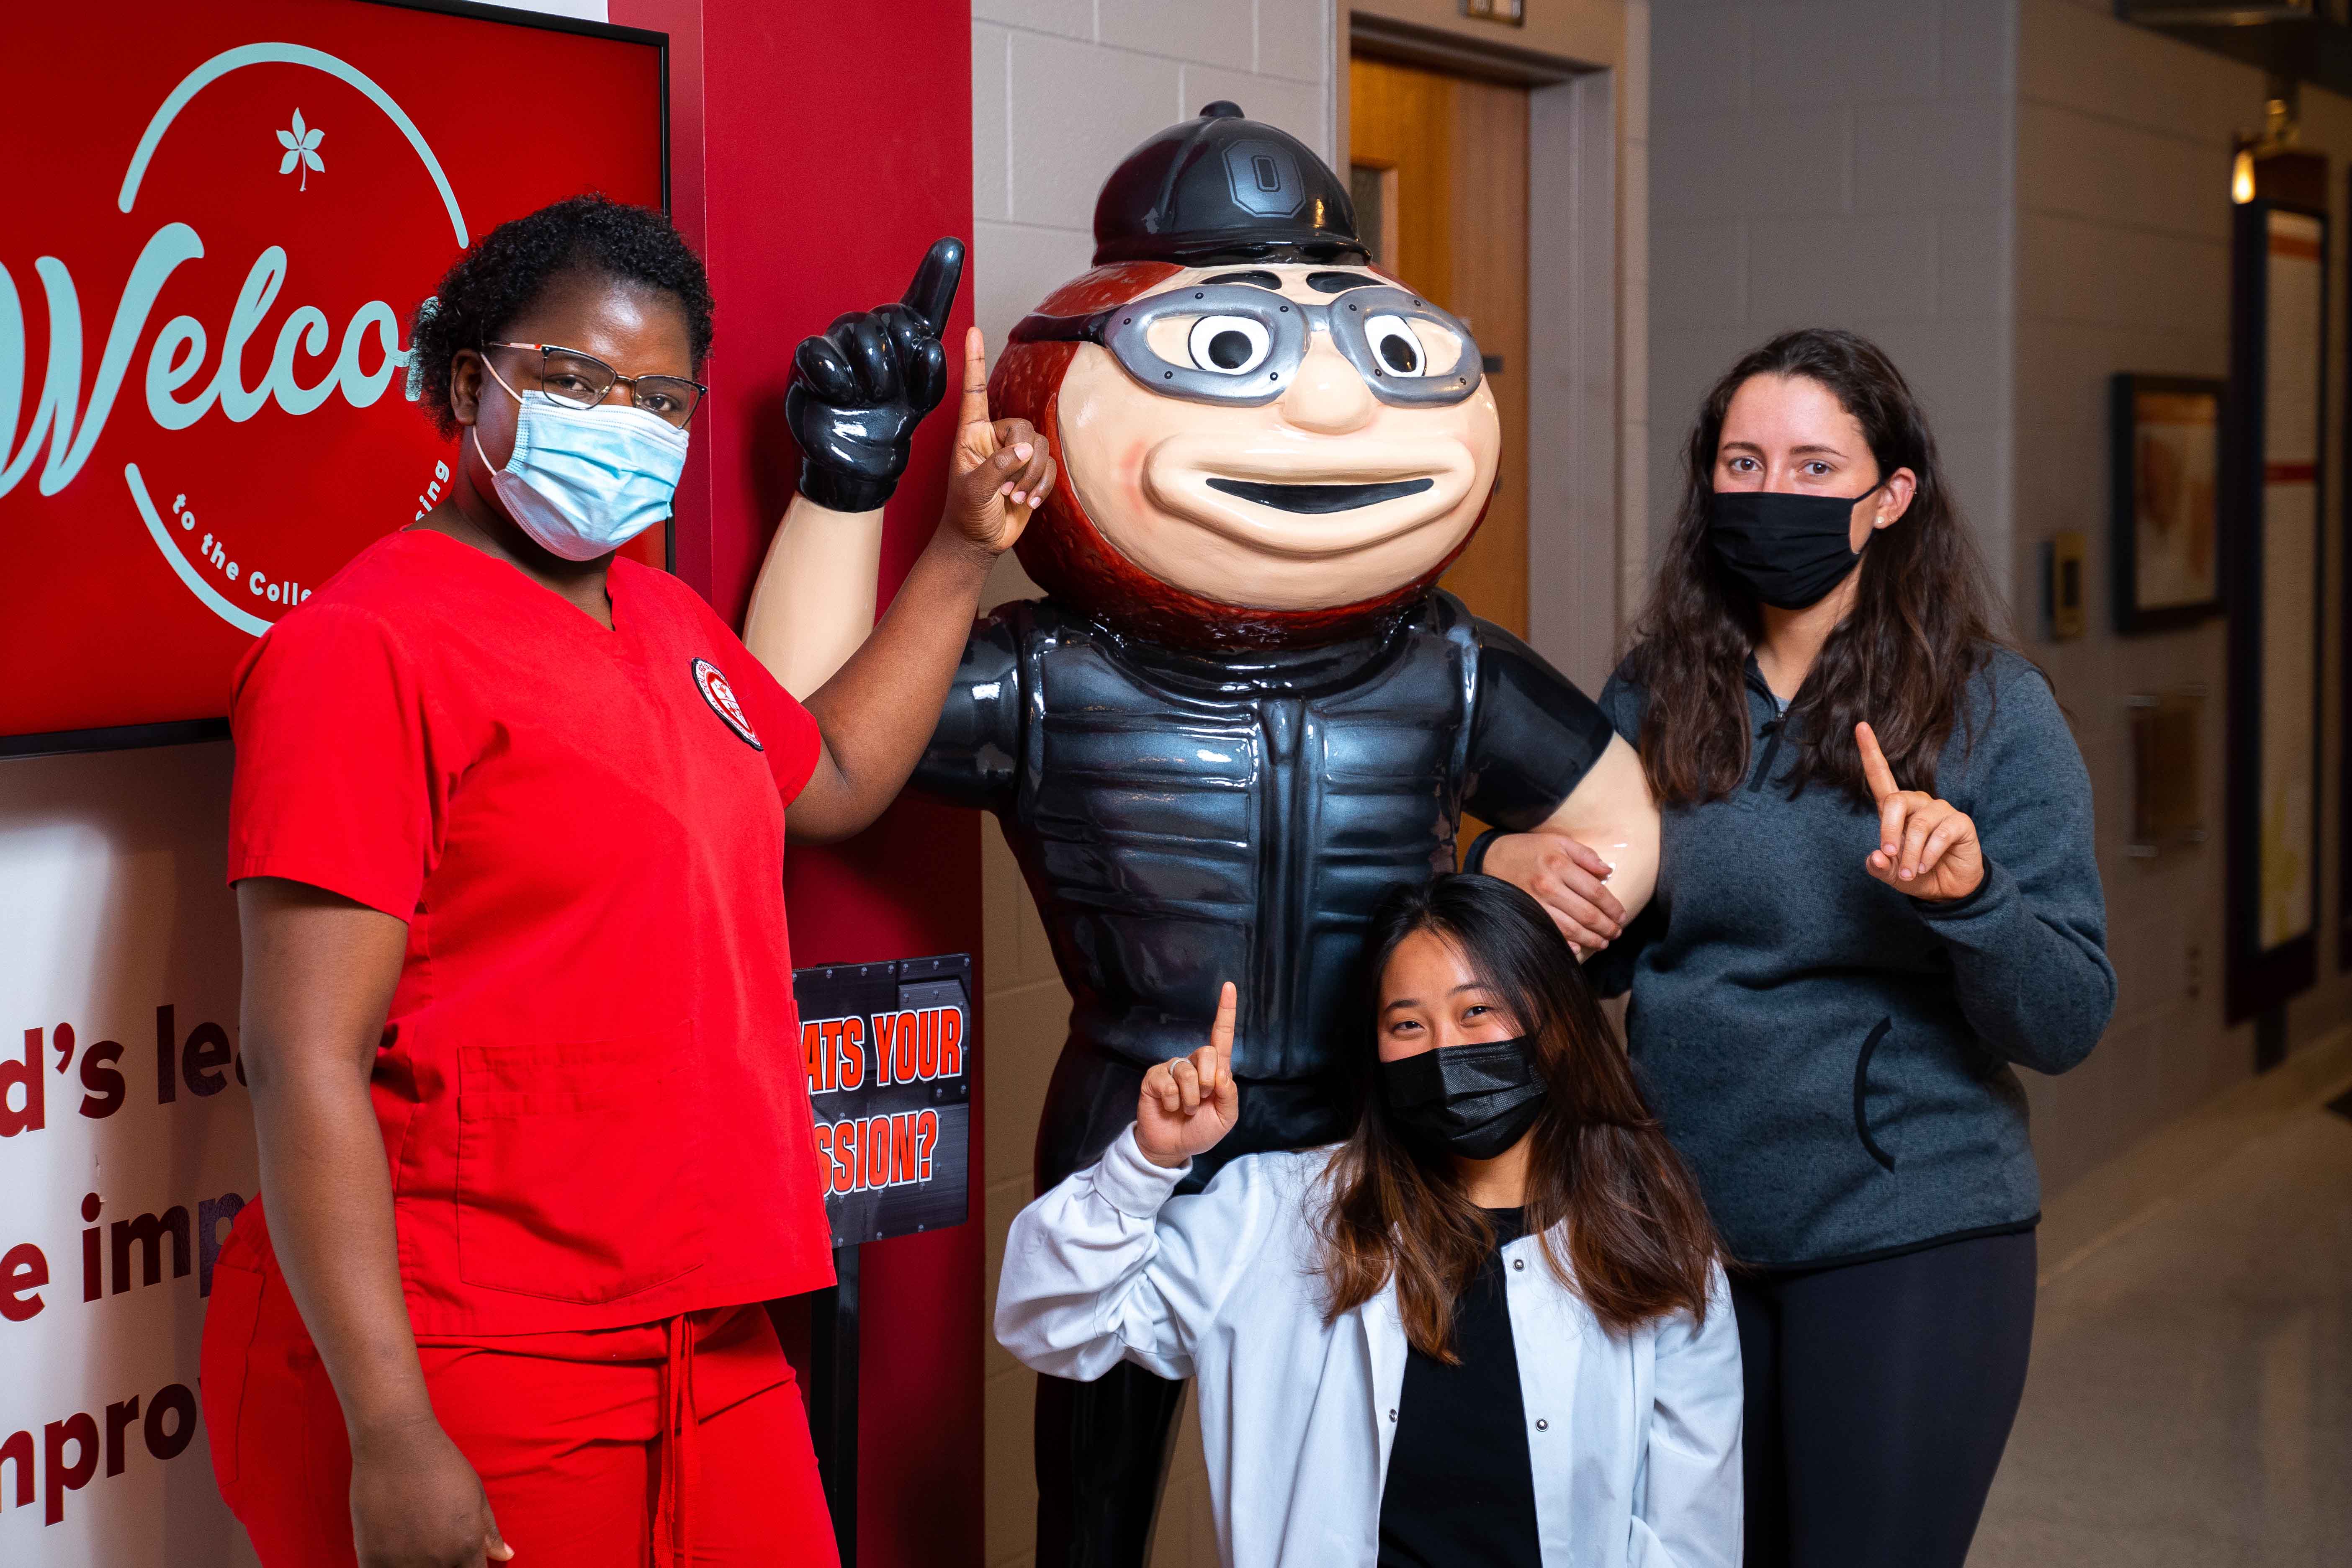 BSN nursing students Monicah Karera, Carolyn Zhang and Audrey Robinson pose with Mission Impossible Brutus in Newton Hall